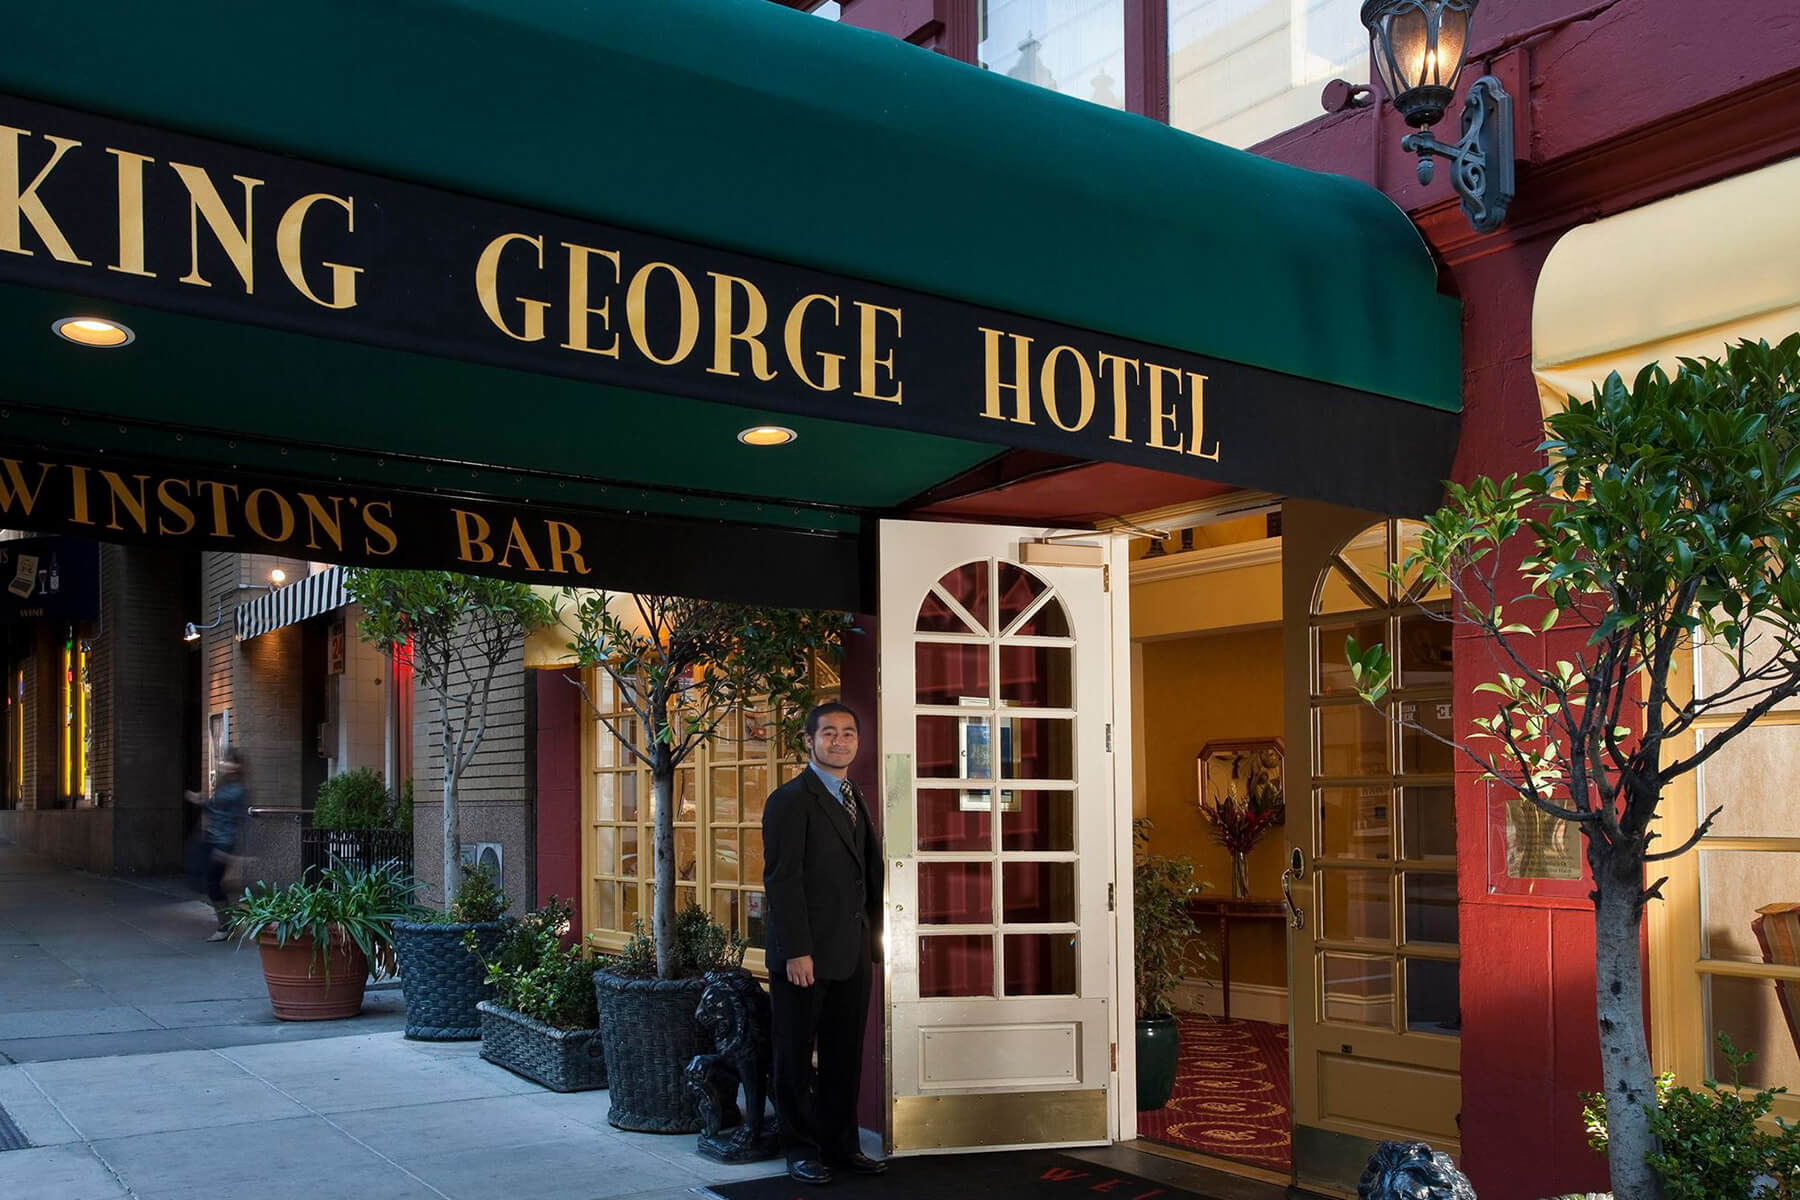 Entrance of The King George Hotel